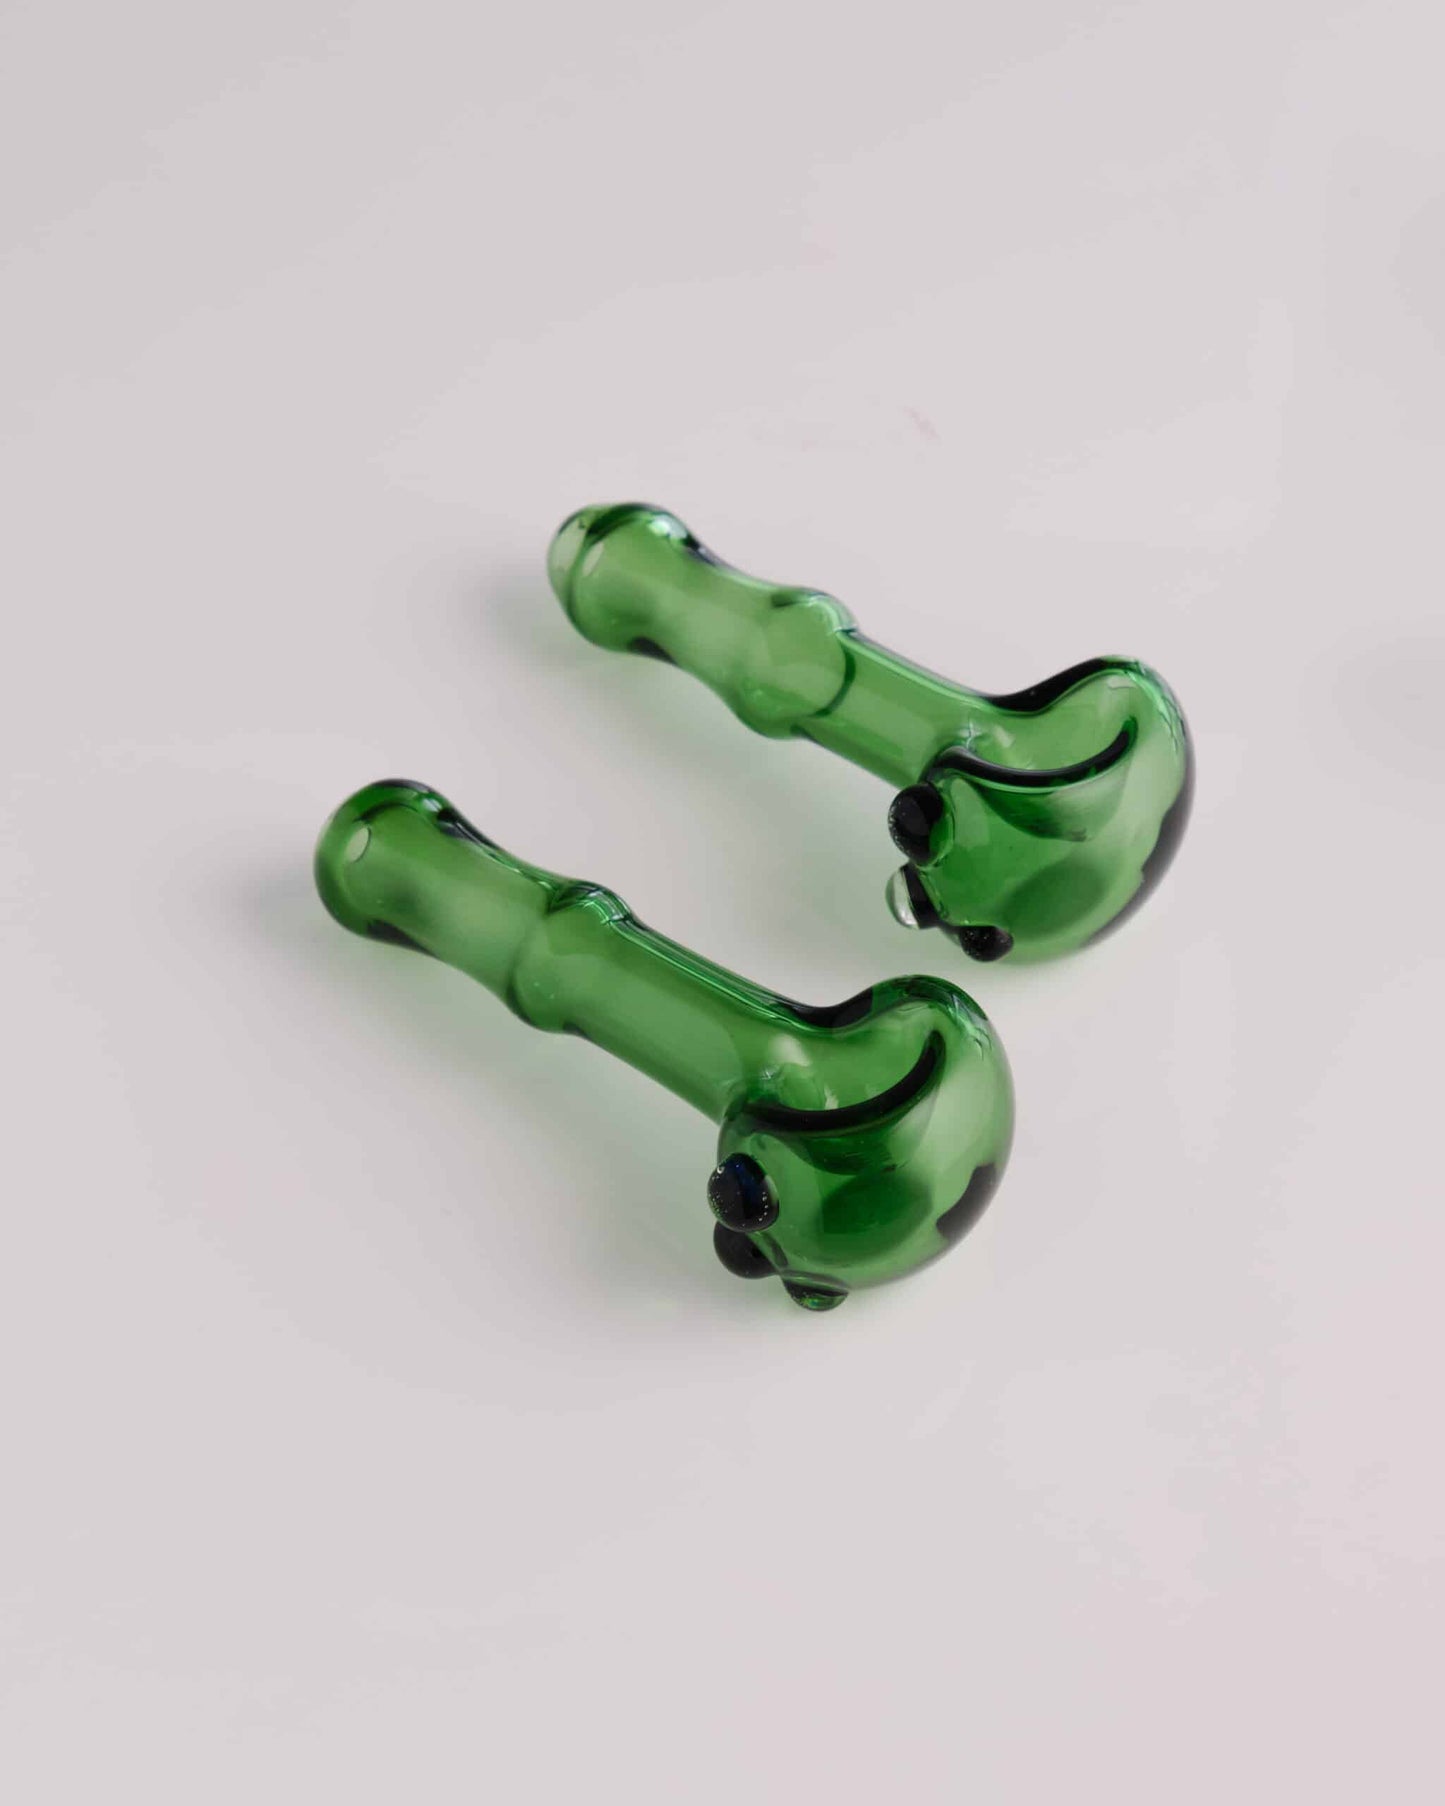 artisan-crafted design of the Green Spoon Pipe by Willy That Glass Guy